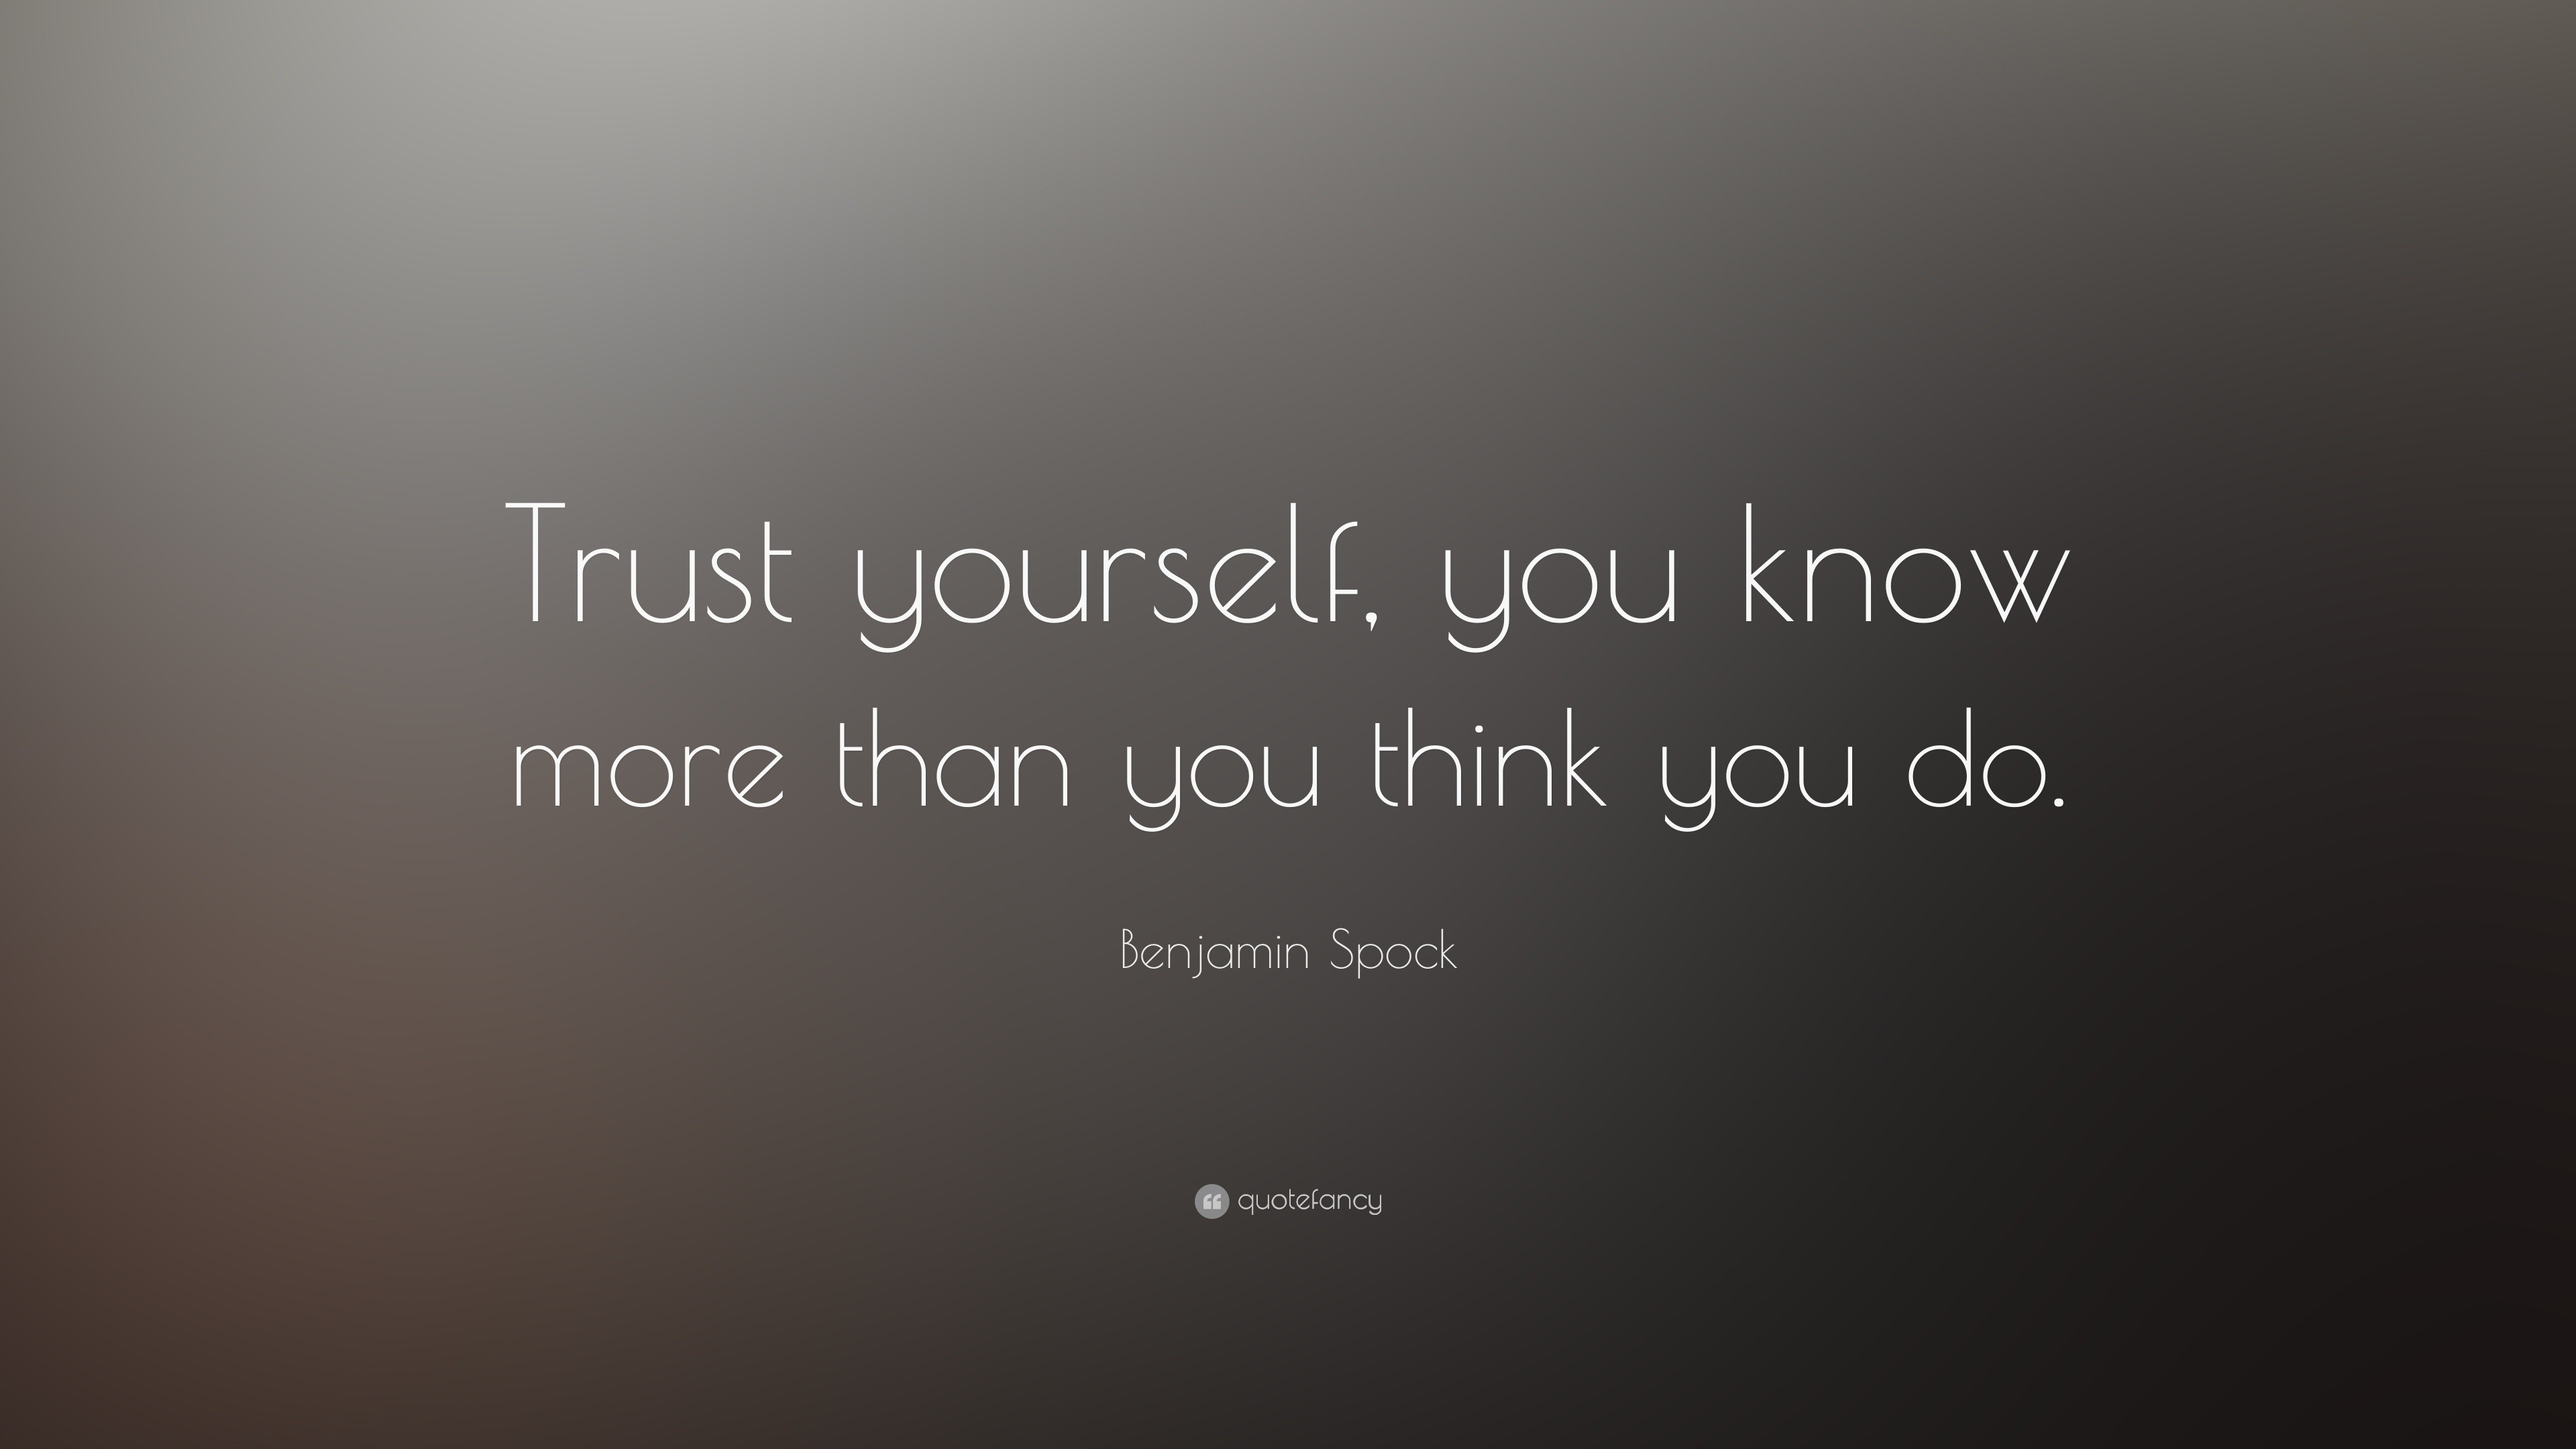 Benjamin Spock Quote: “Trust yourself, you know more than you think you ...